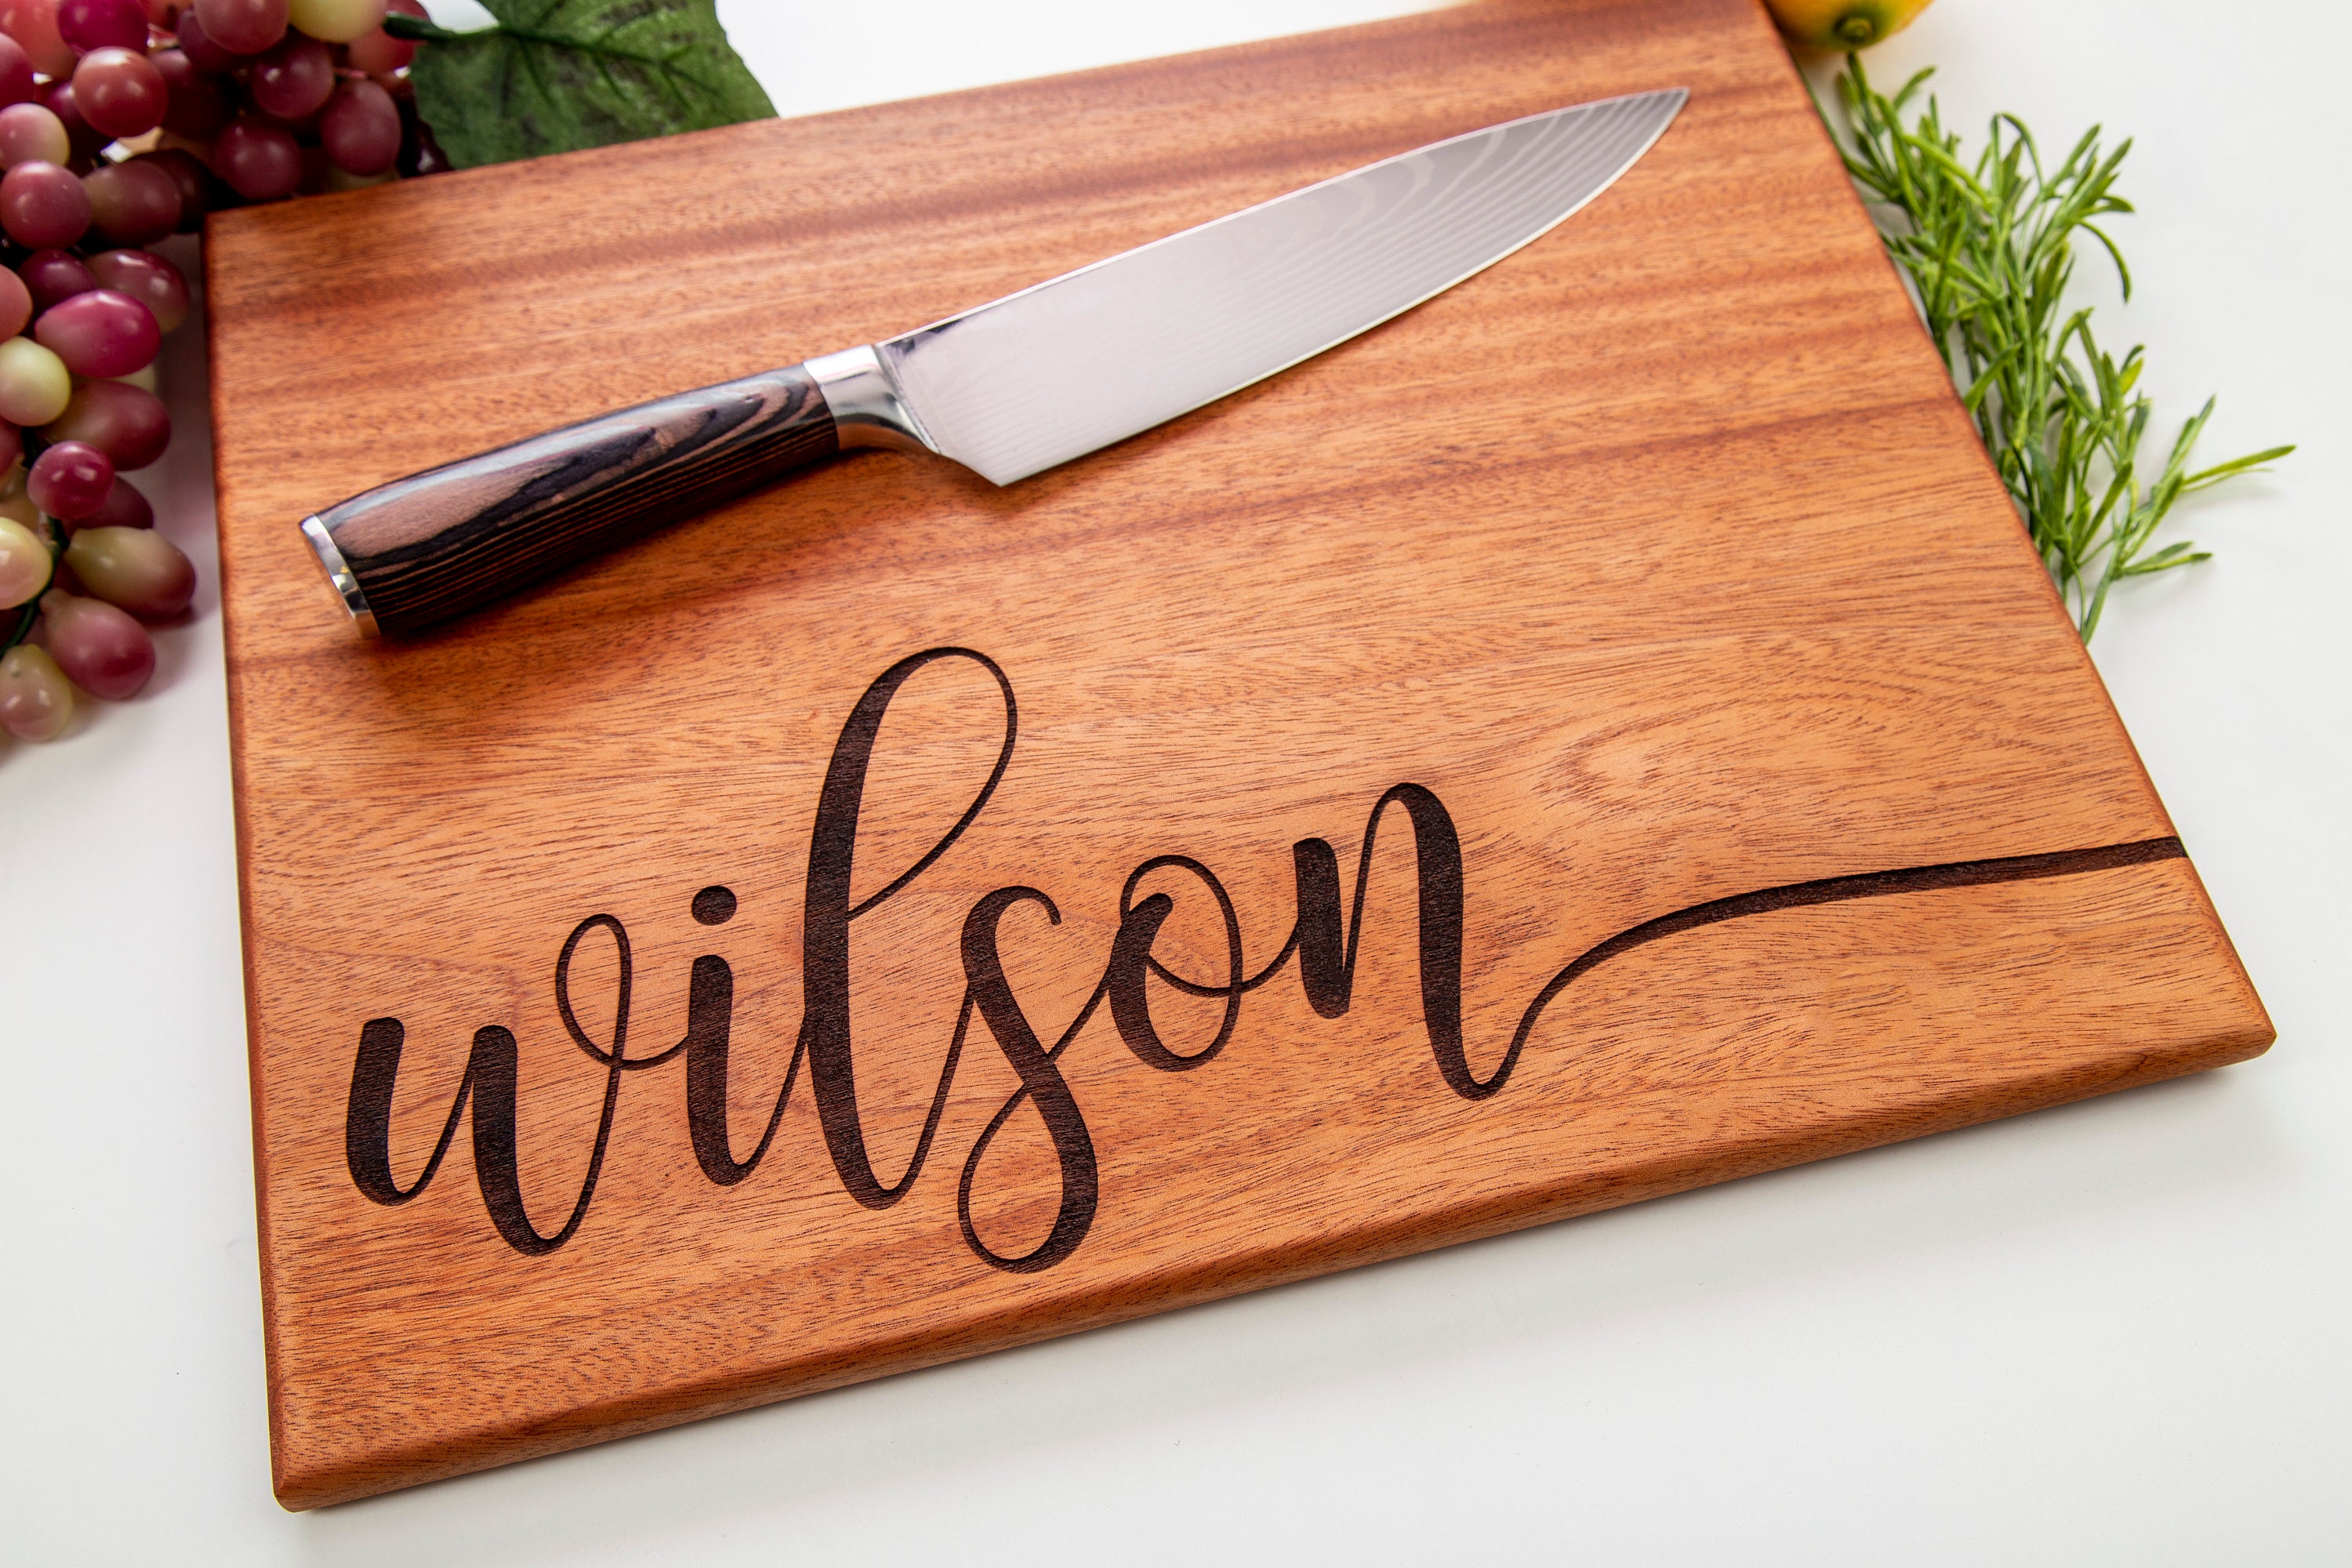 Welcome to our kitchen personalized engraved cutting board - Wood & Whatnot